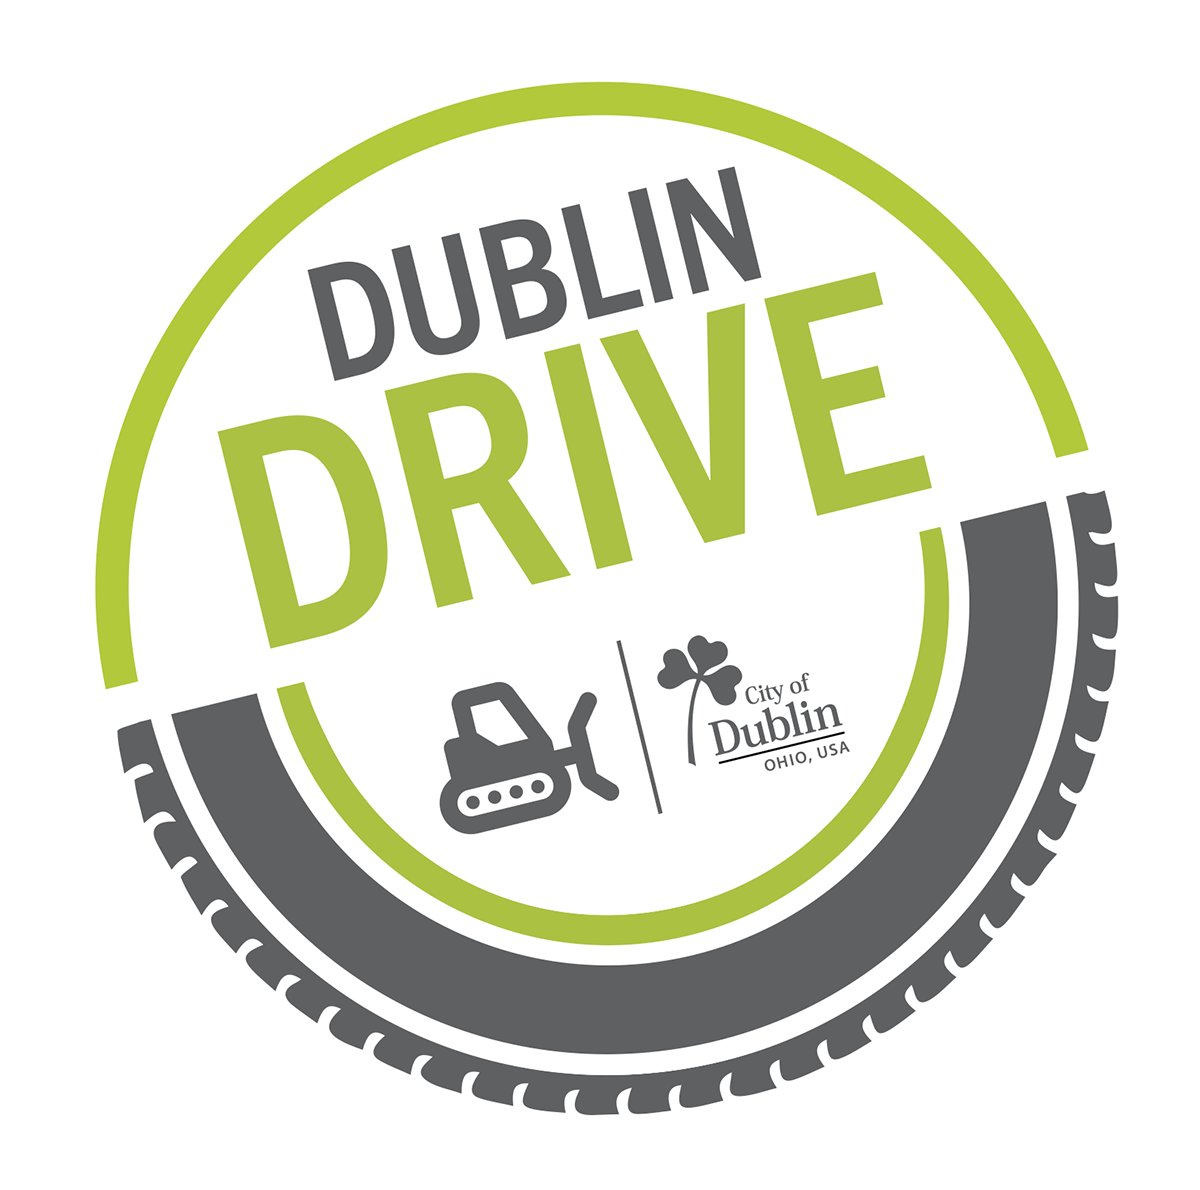 🚗 Thanks for driving safely in Dublin. Temporary road closure updates for the week of April 15 can be found here ➡️ dublinohiousa.gov/construction. #DublinDrive